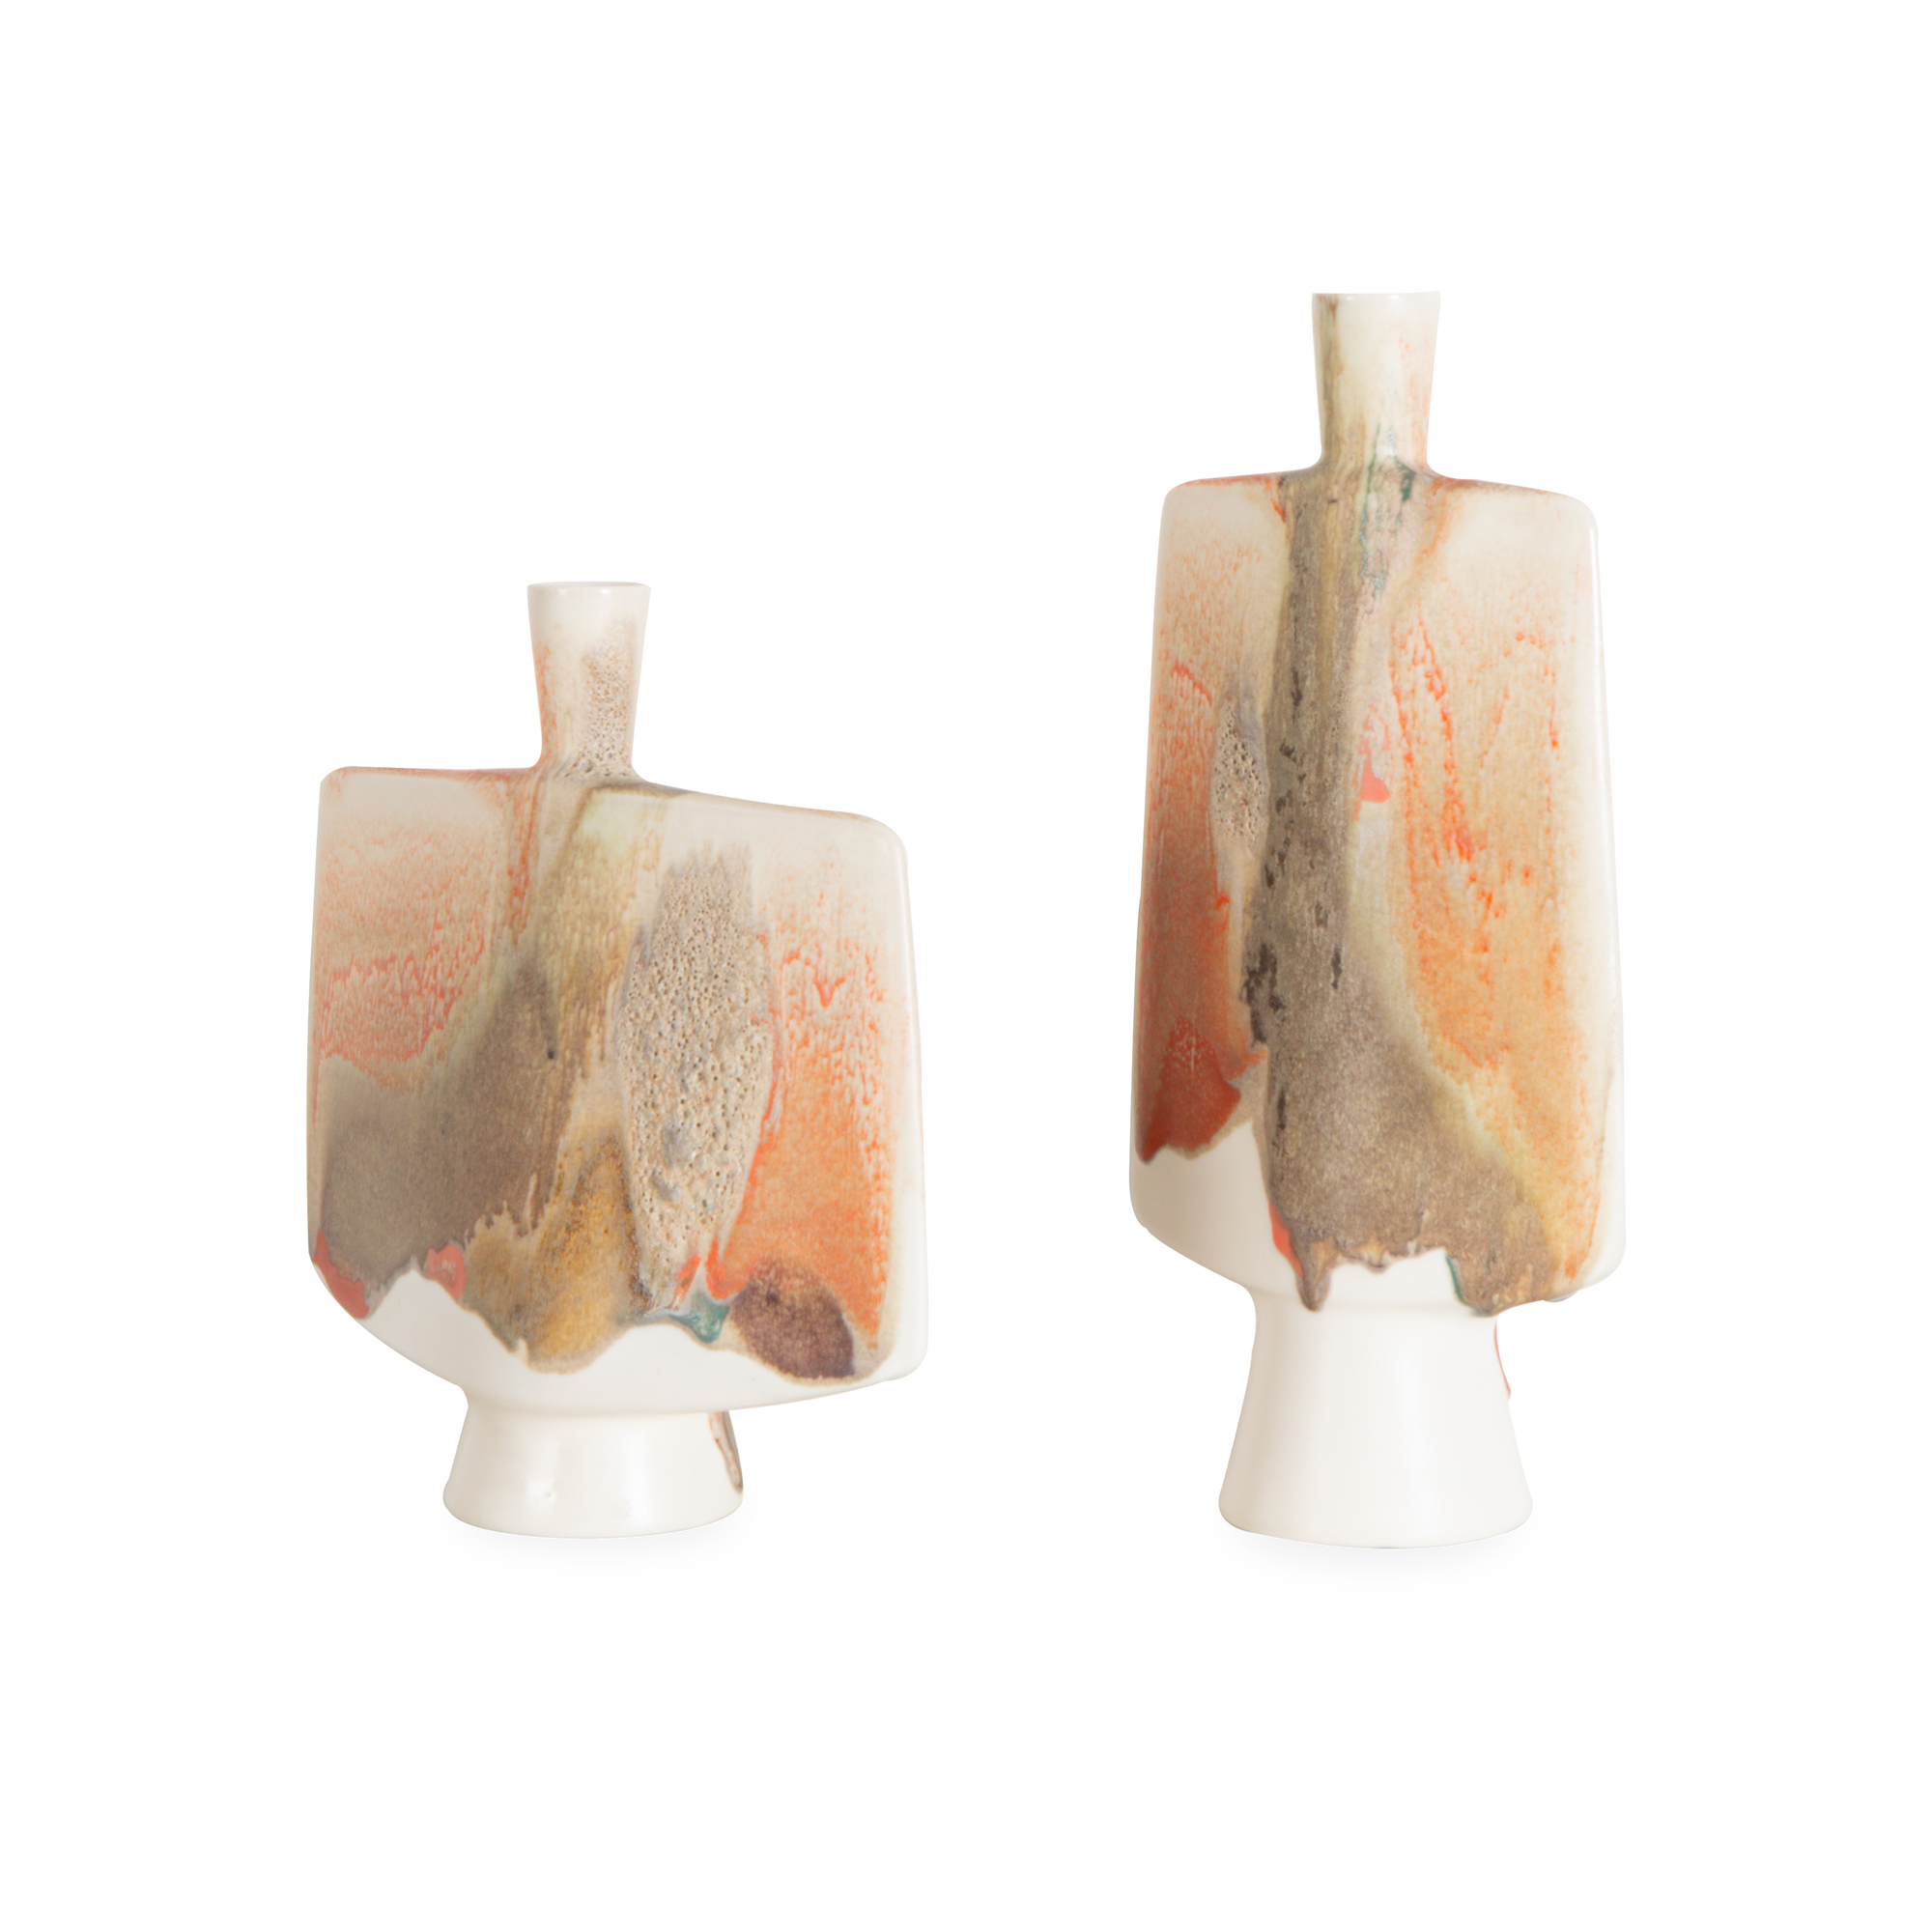 This one-of-a-kind, handpainted set of candle holders by KleinReid combines organic colour patterns and a soft, rounded silhouette to provide a captivating addition to your tablesc